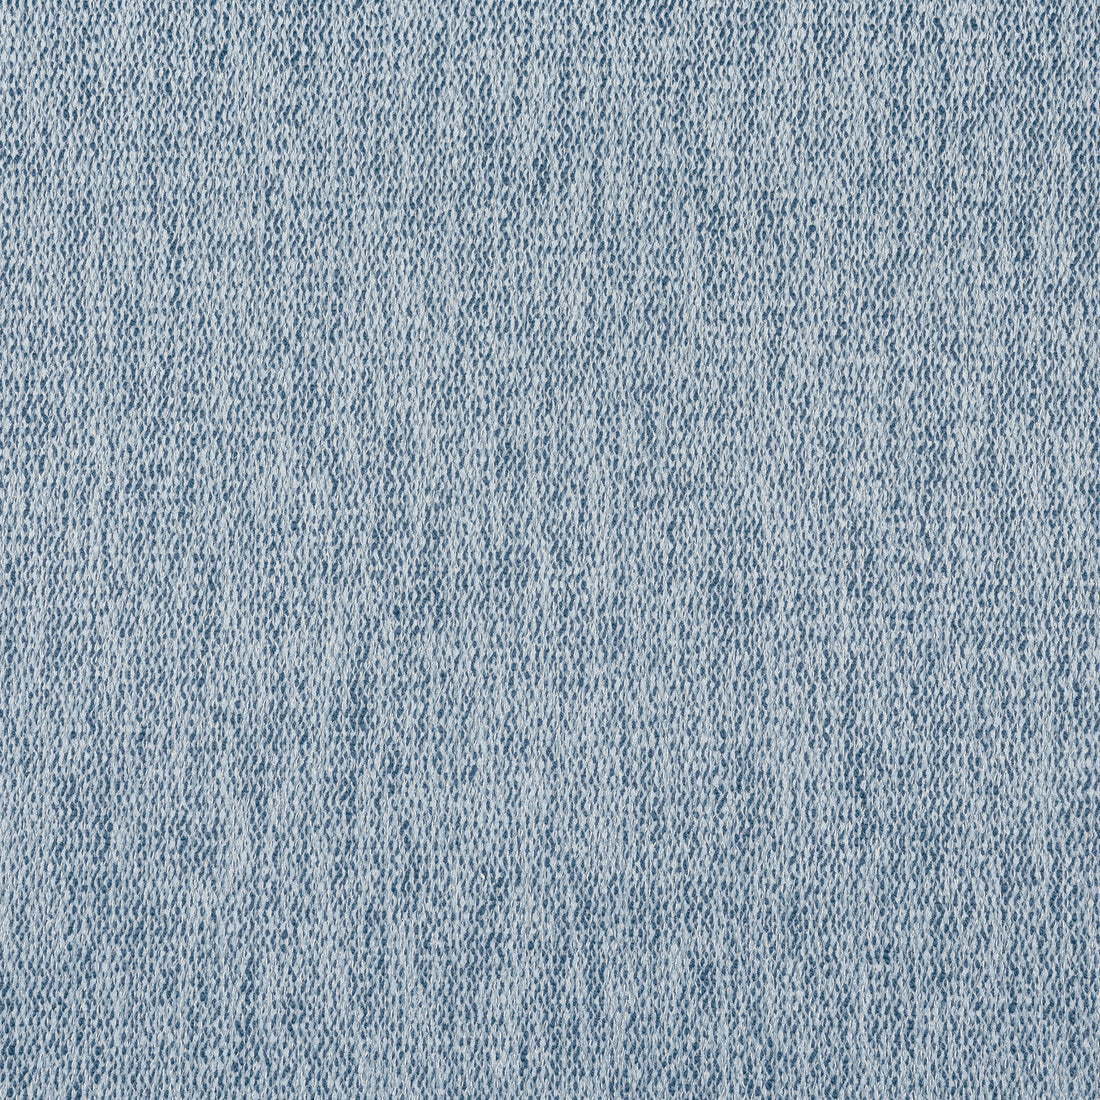 Arroyo fabric in denim color - pattern number W8787 - by Thibaut in the Haven Textures collection